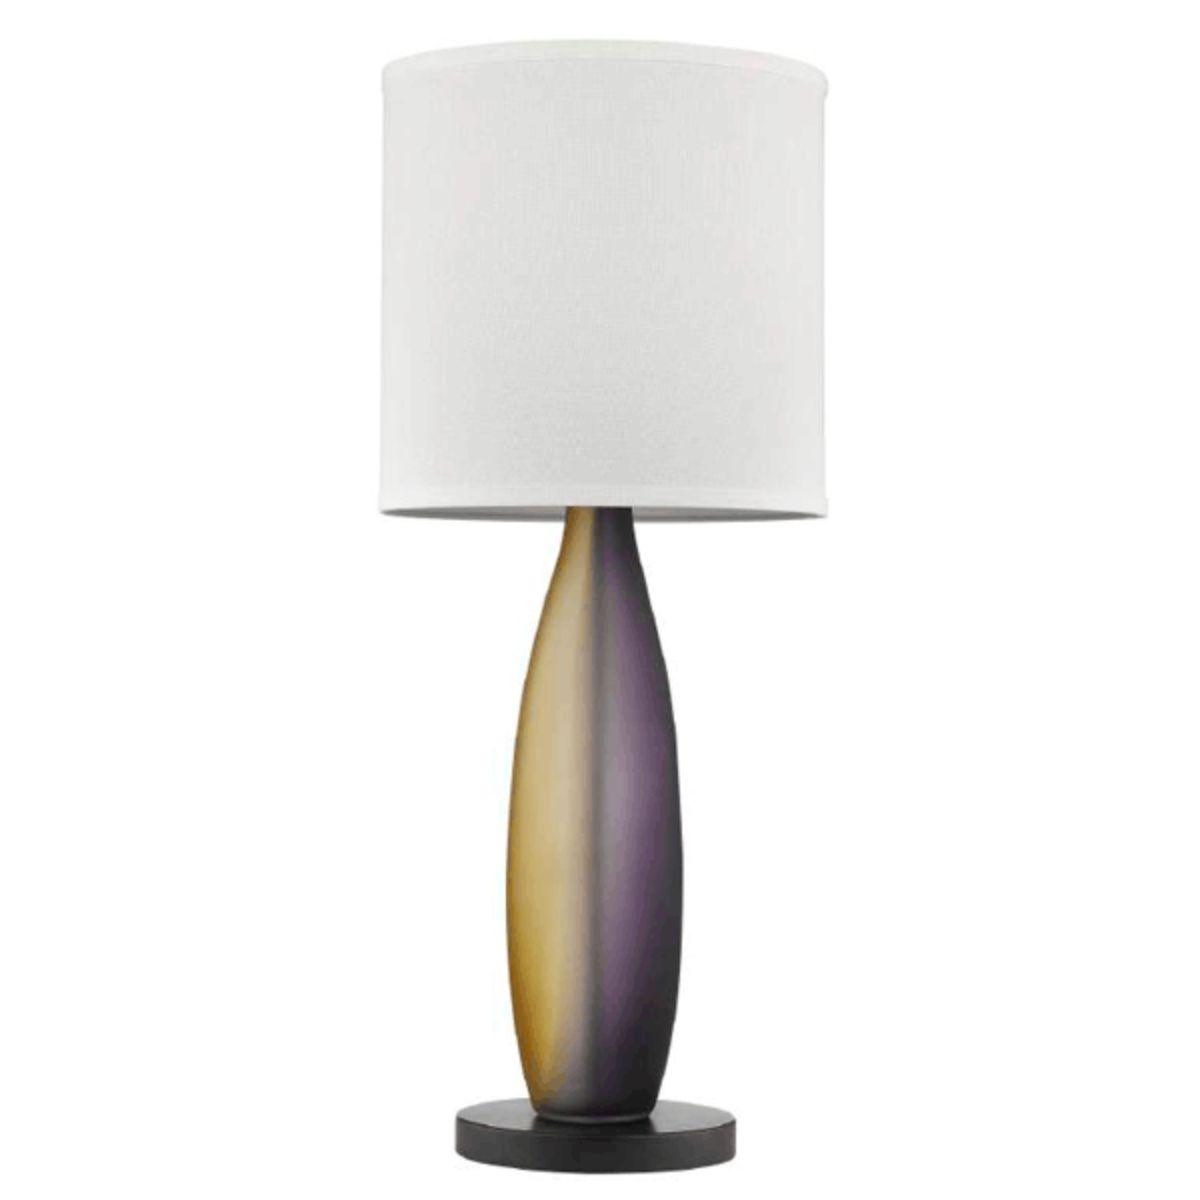 Elixer 1 Light Table Lamp Plum Gold Frosted Glass with Ebony Lacquer Finish